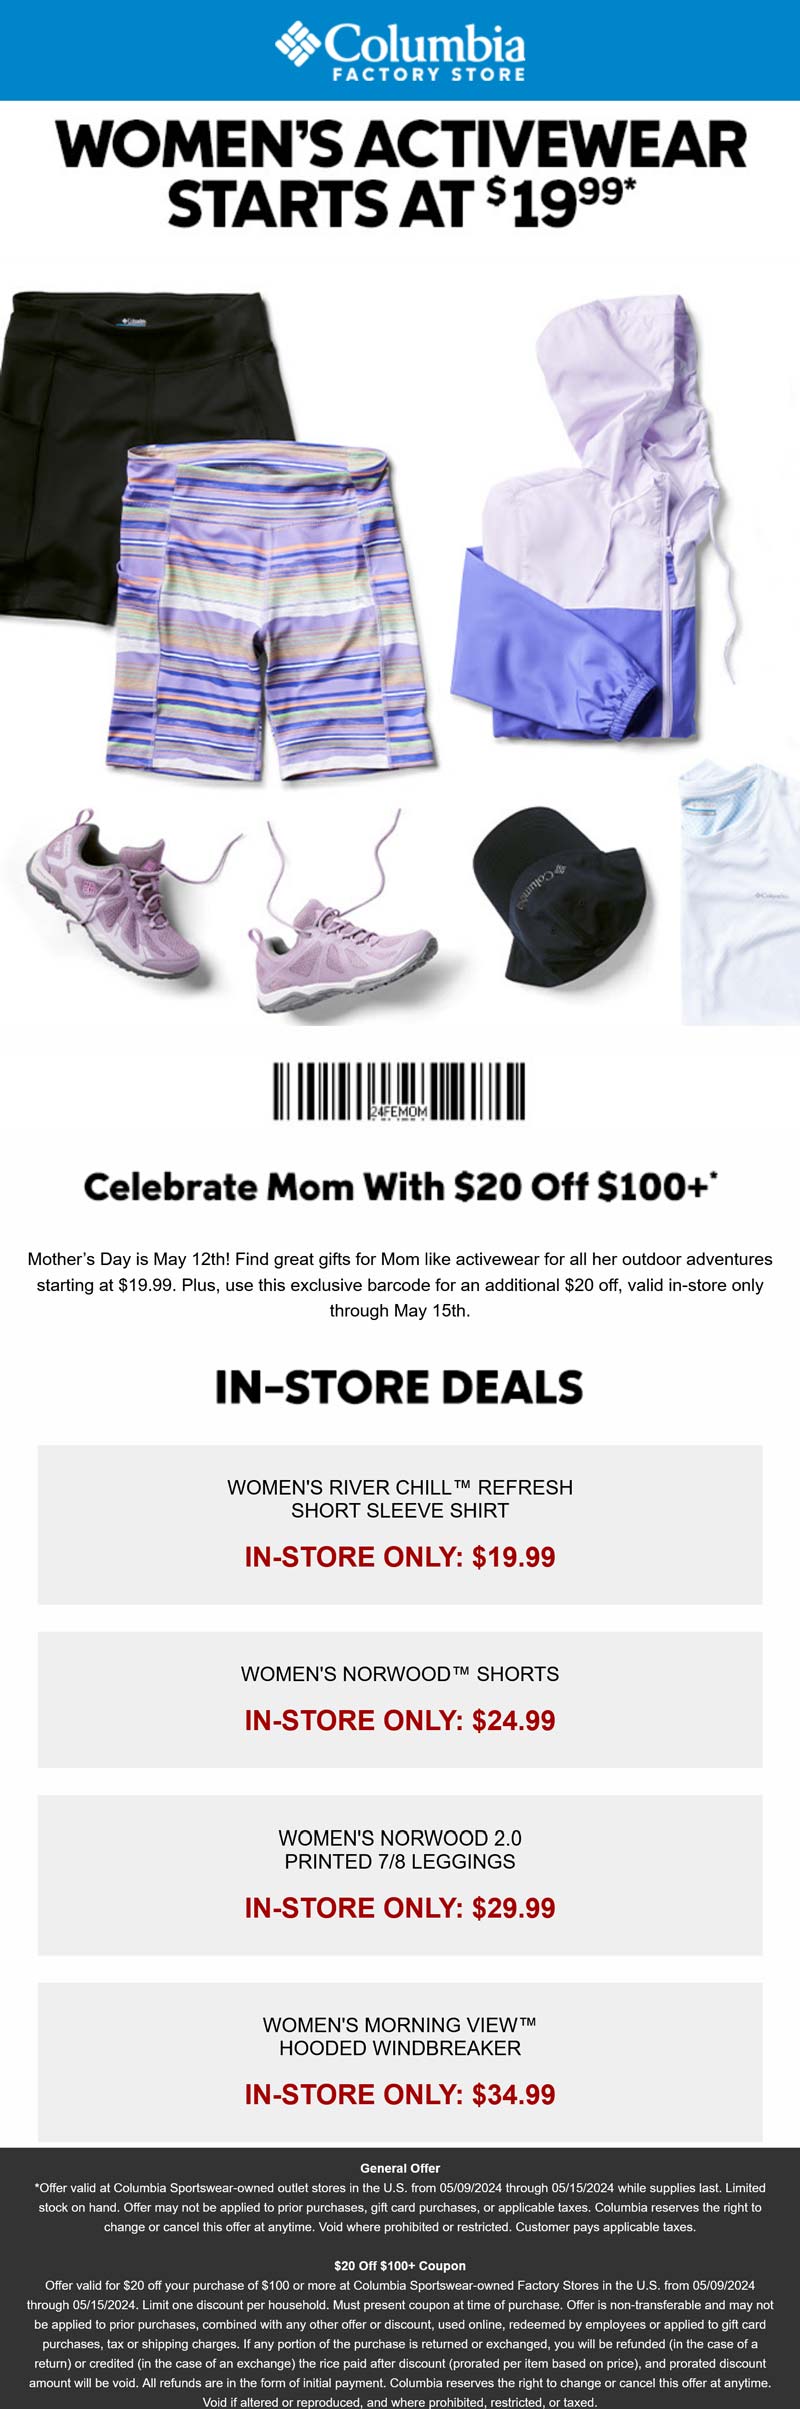 Columbia Factory stores Coupon  $20 off $100 at Columbia Factory stores #columbiafactory 